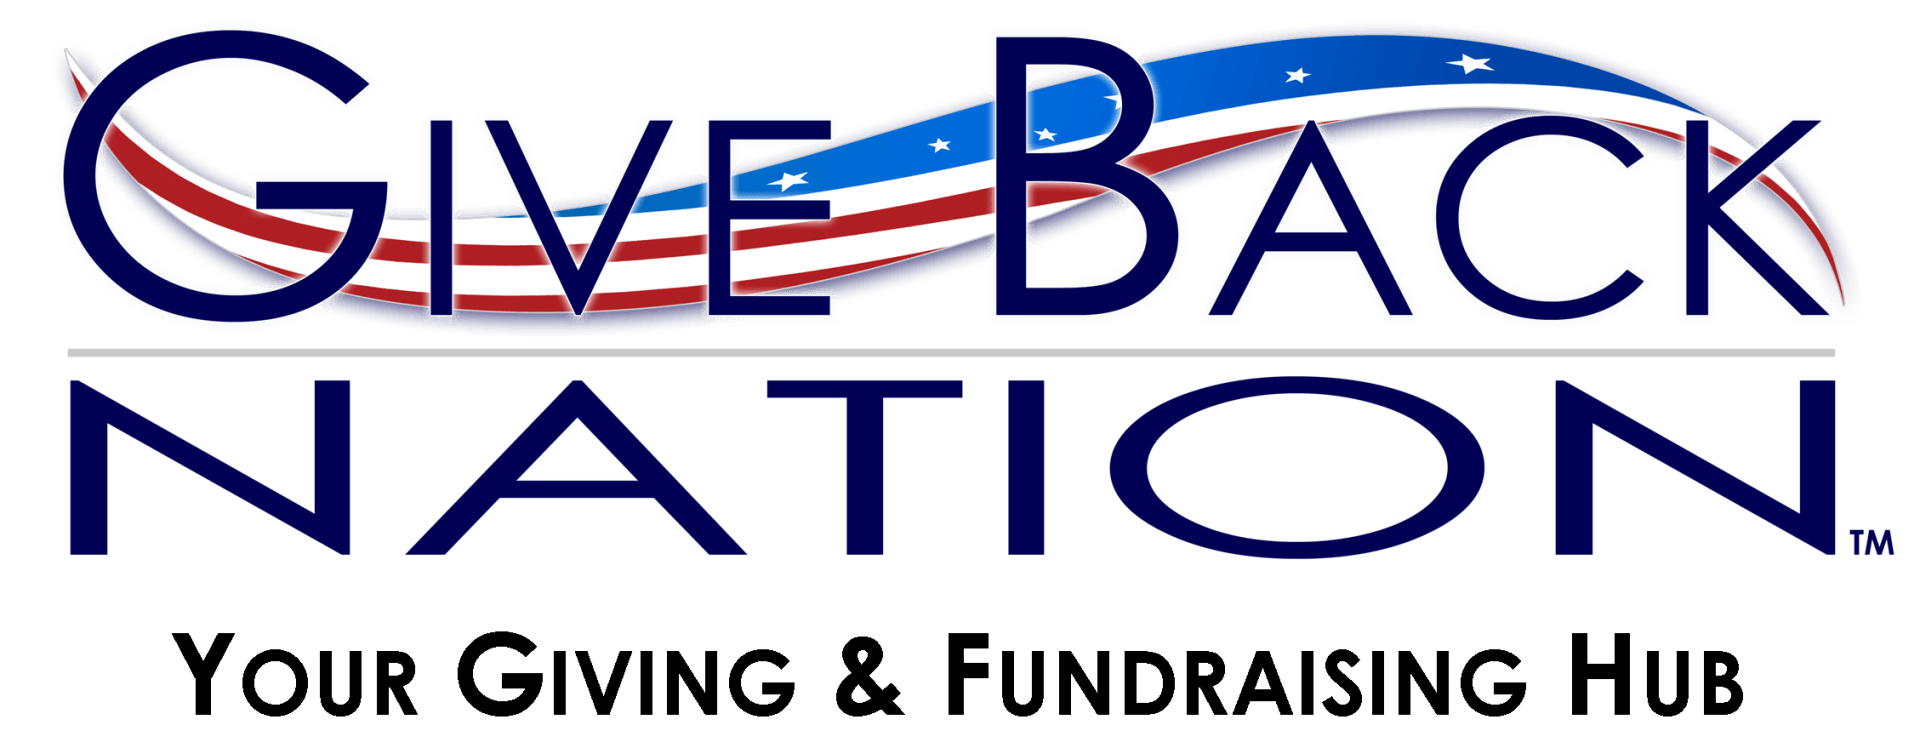 Give Back Nation is your giving and fundraising hub